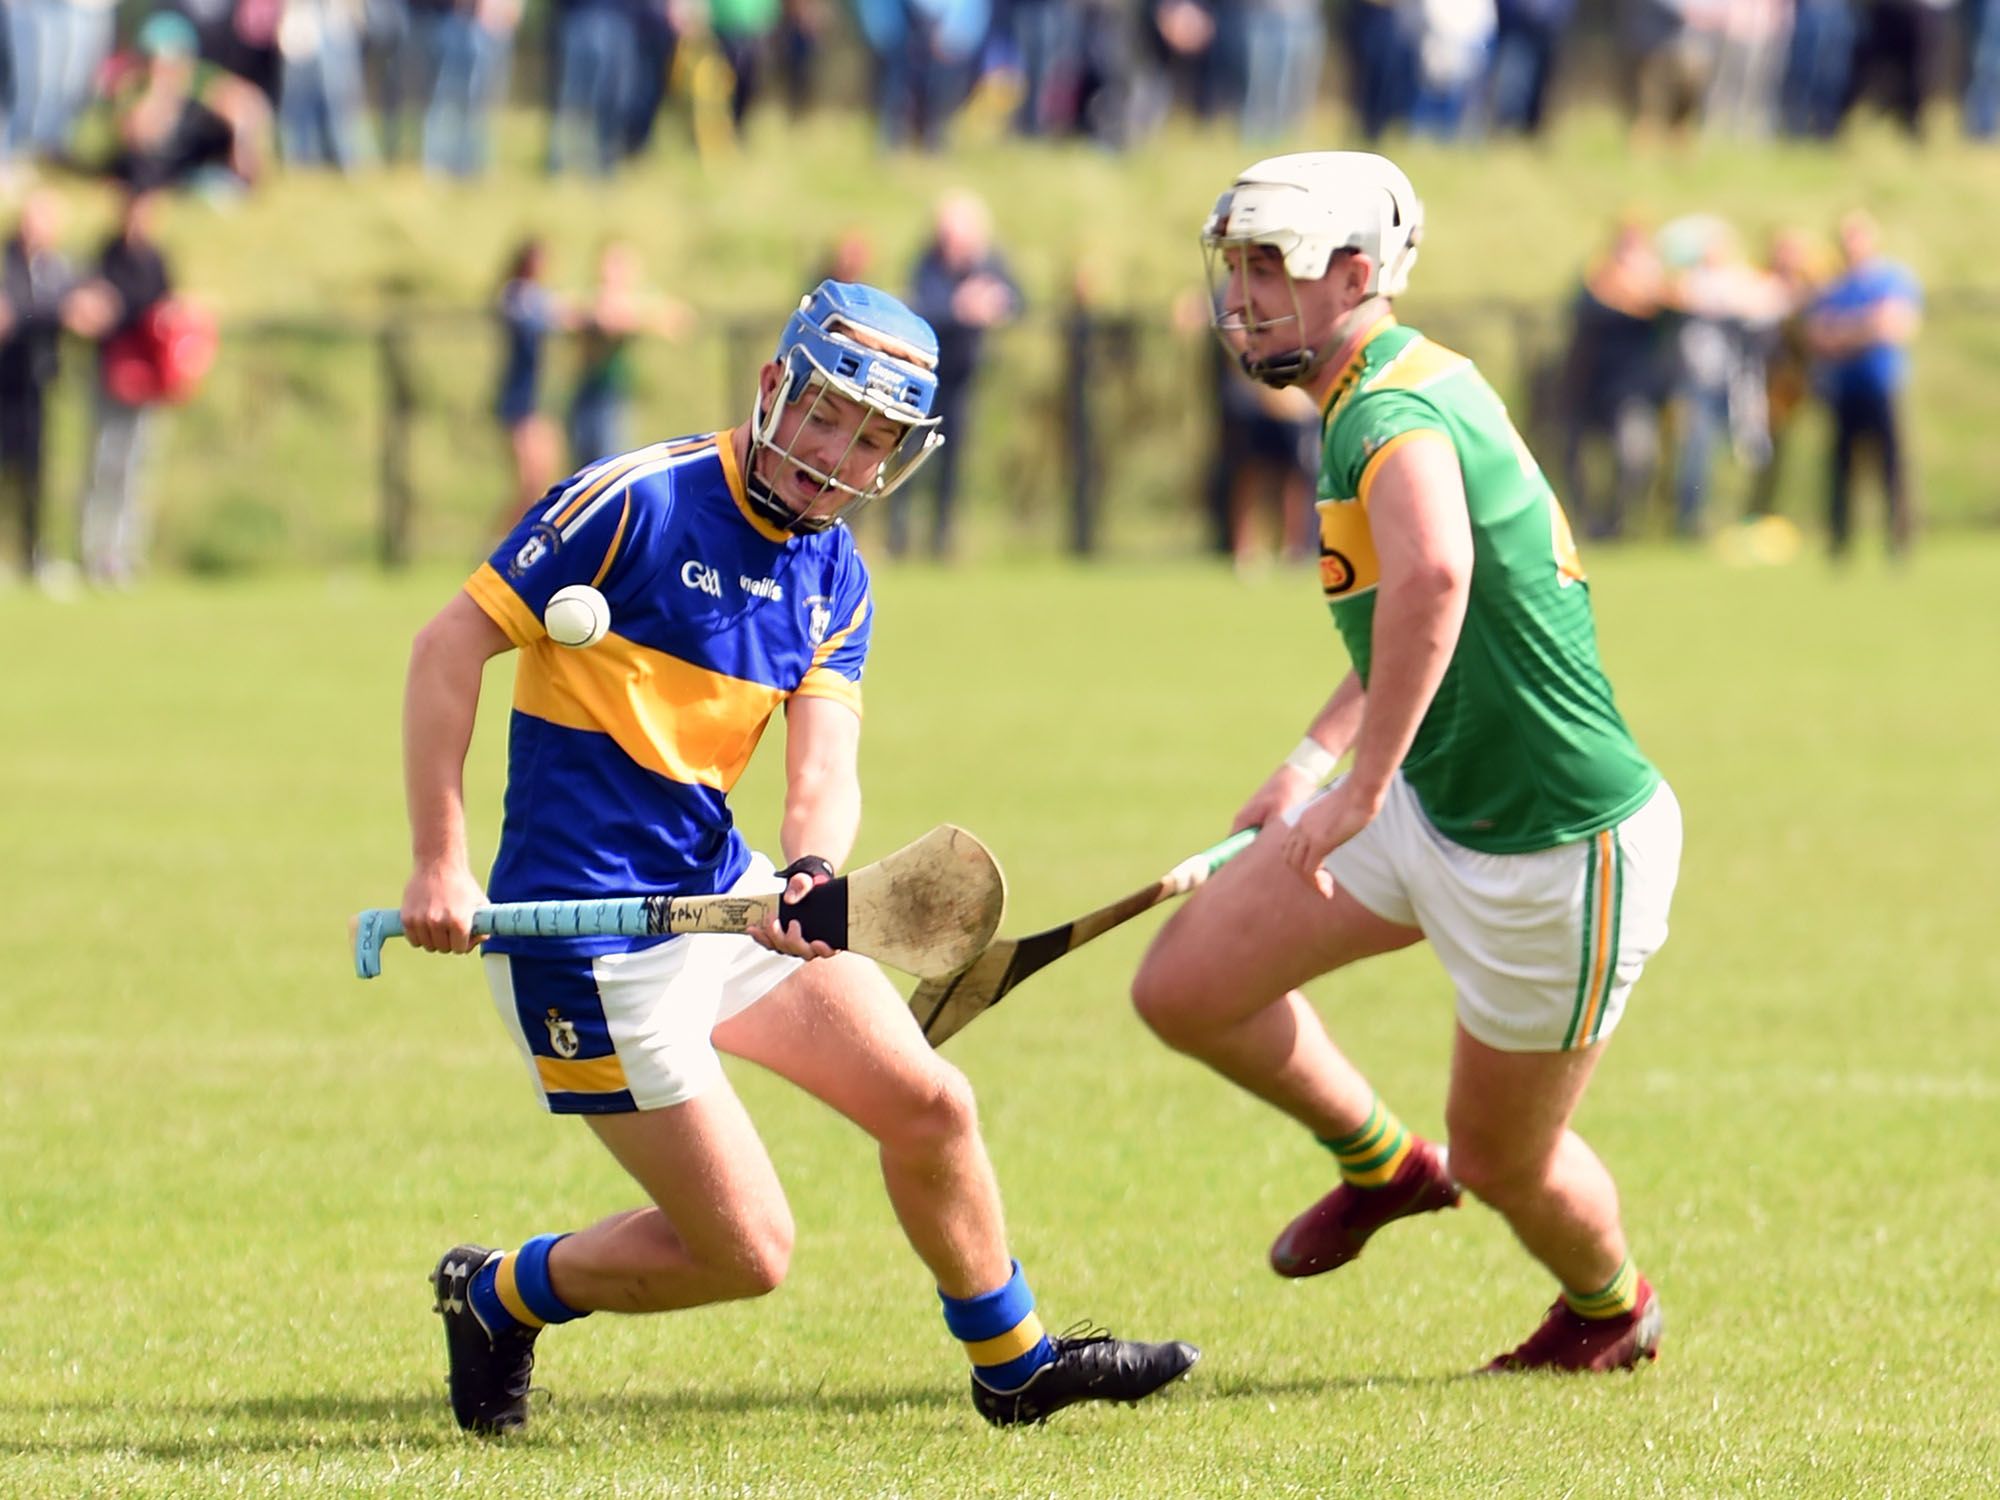 Tiernan Murphy gets out in front of Conor McKinley